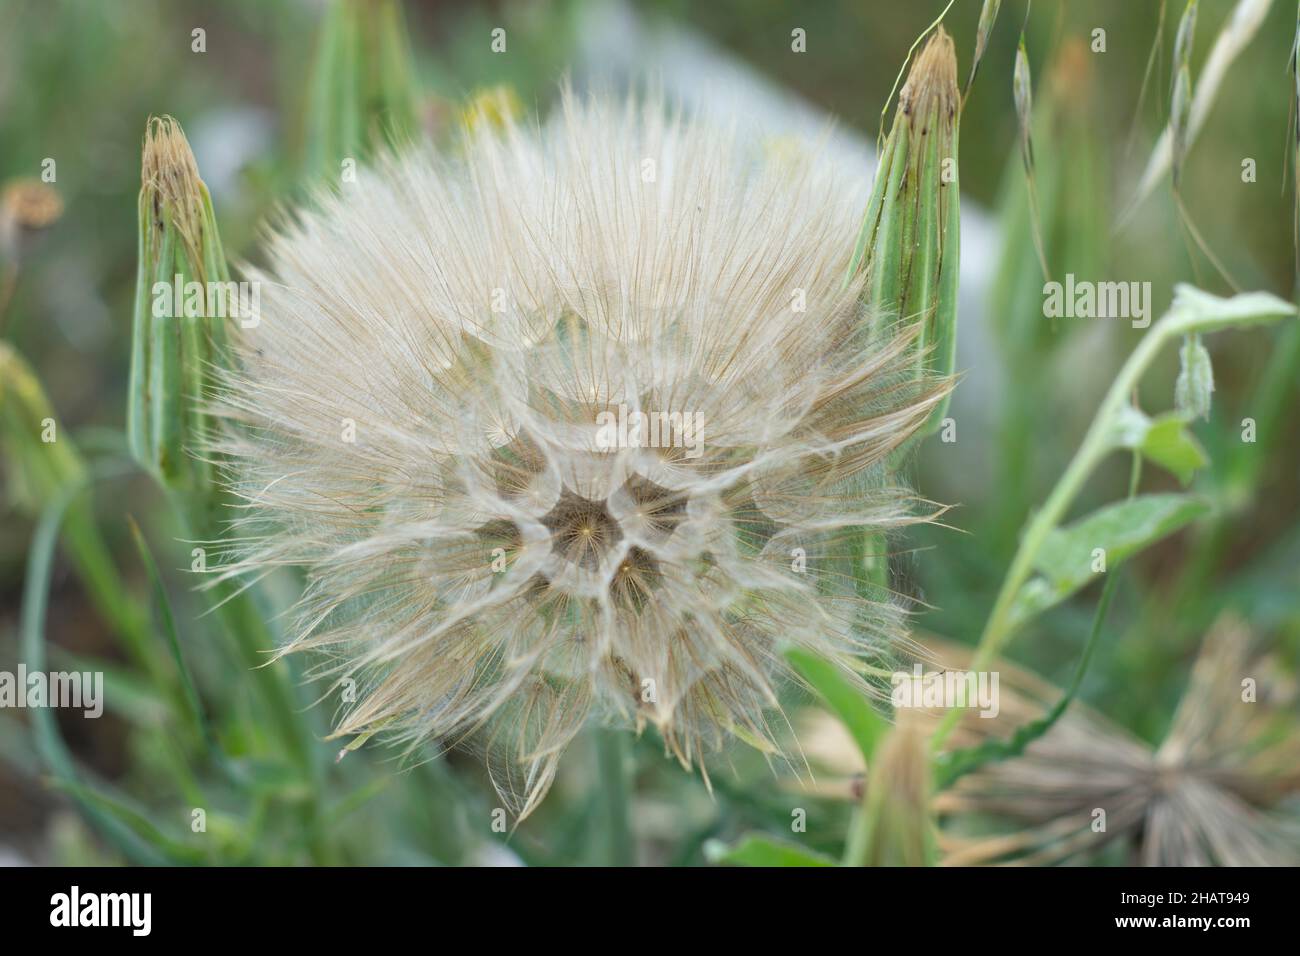 Taraxacum officinale, the dandelion or common dandelion, is a flowering herbaceous perennial plant of the dandelion genus in the family Asteraceae Stock Photo